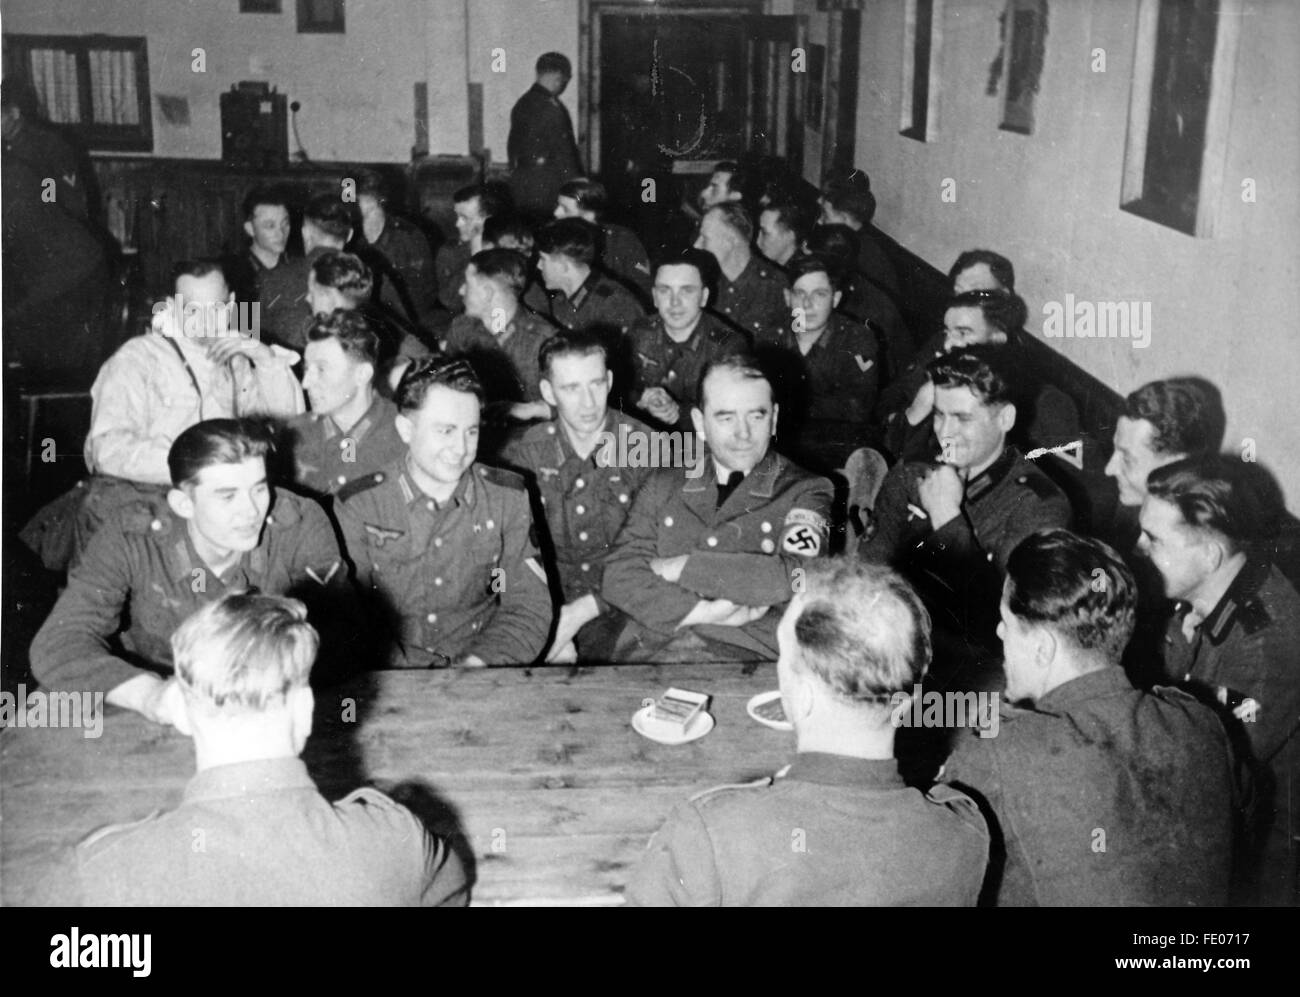 The Nazi propaganda picture shows the Minister of Armaments and War Production Albert Speer (with swastika armband) between soldiers of the German Wehrmacht in an army accommodation at the Polar front. The photo was taken in February 1944. Fotoarchiv für Zeitgeschichtee - NO WIRE SERVICE - Stock Photo